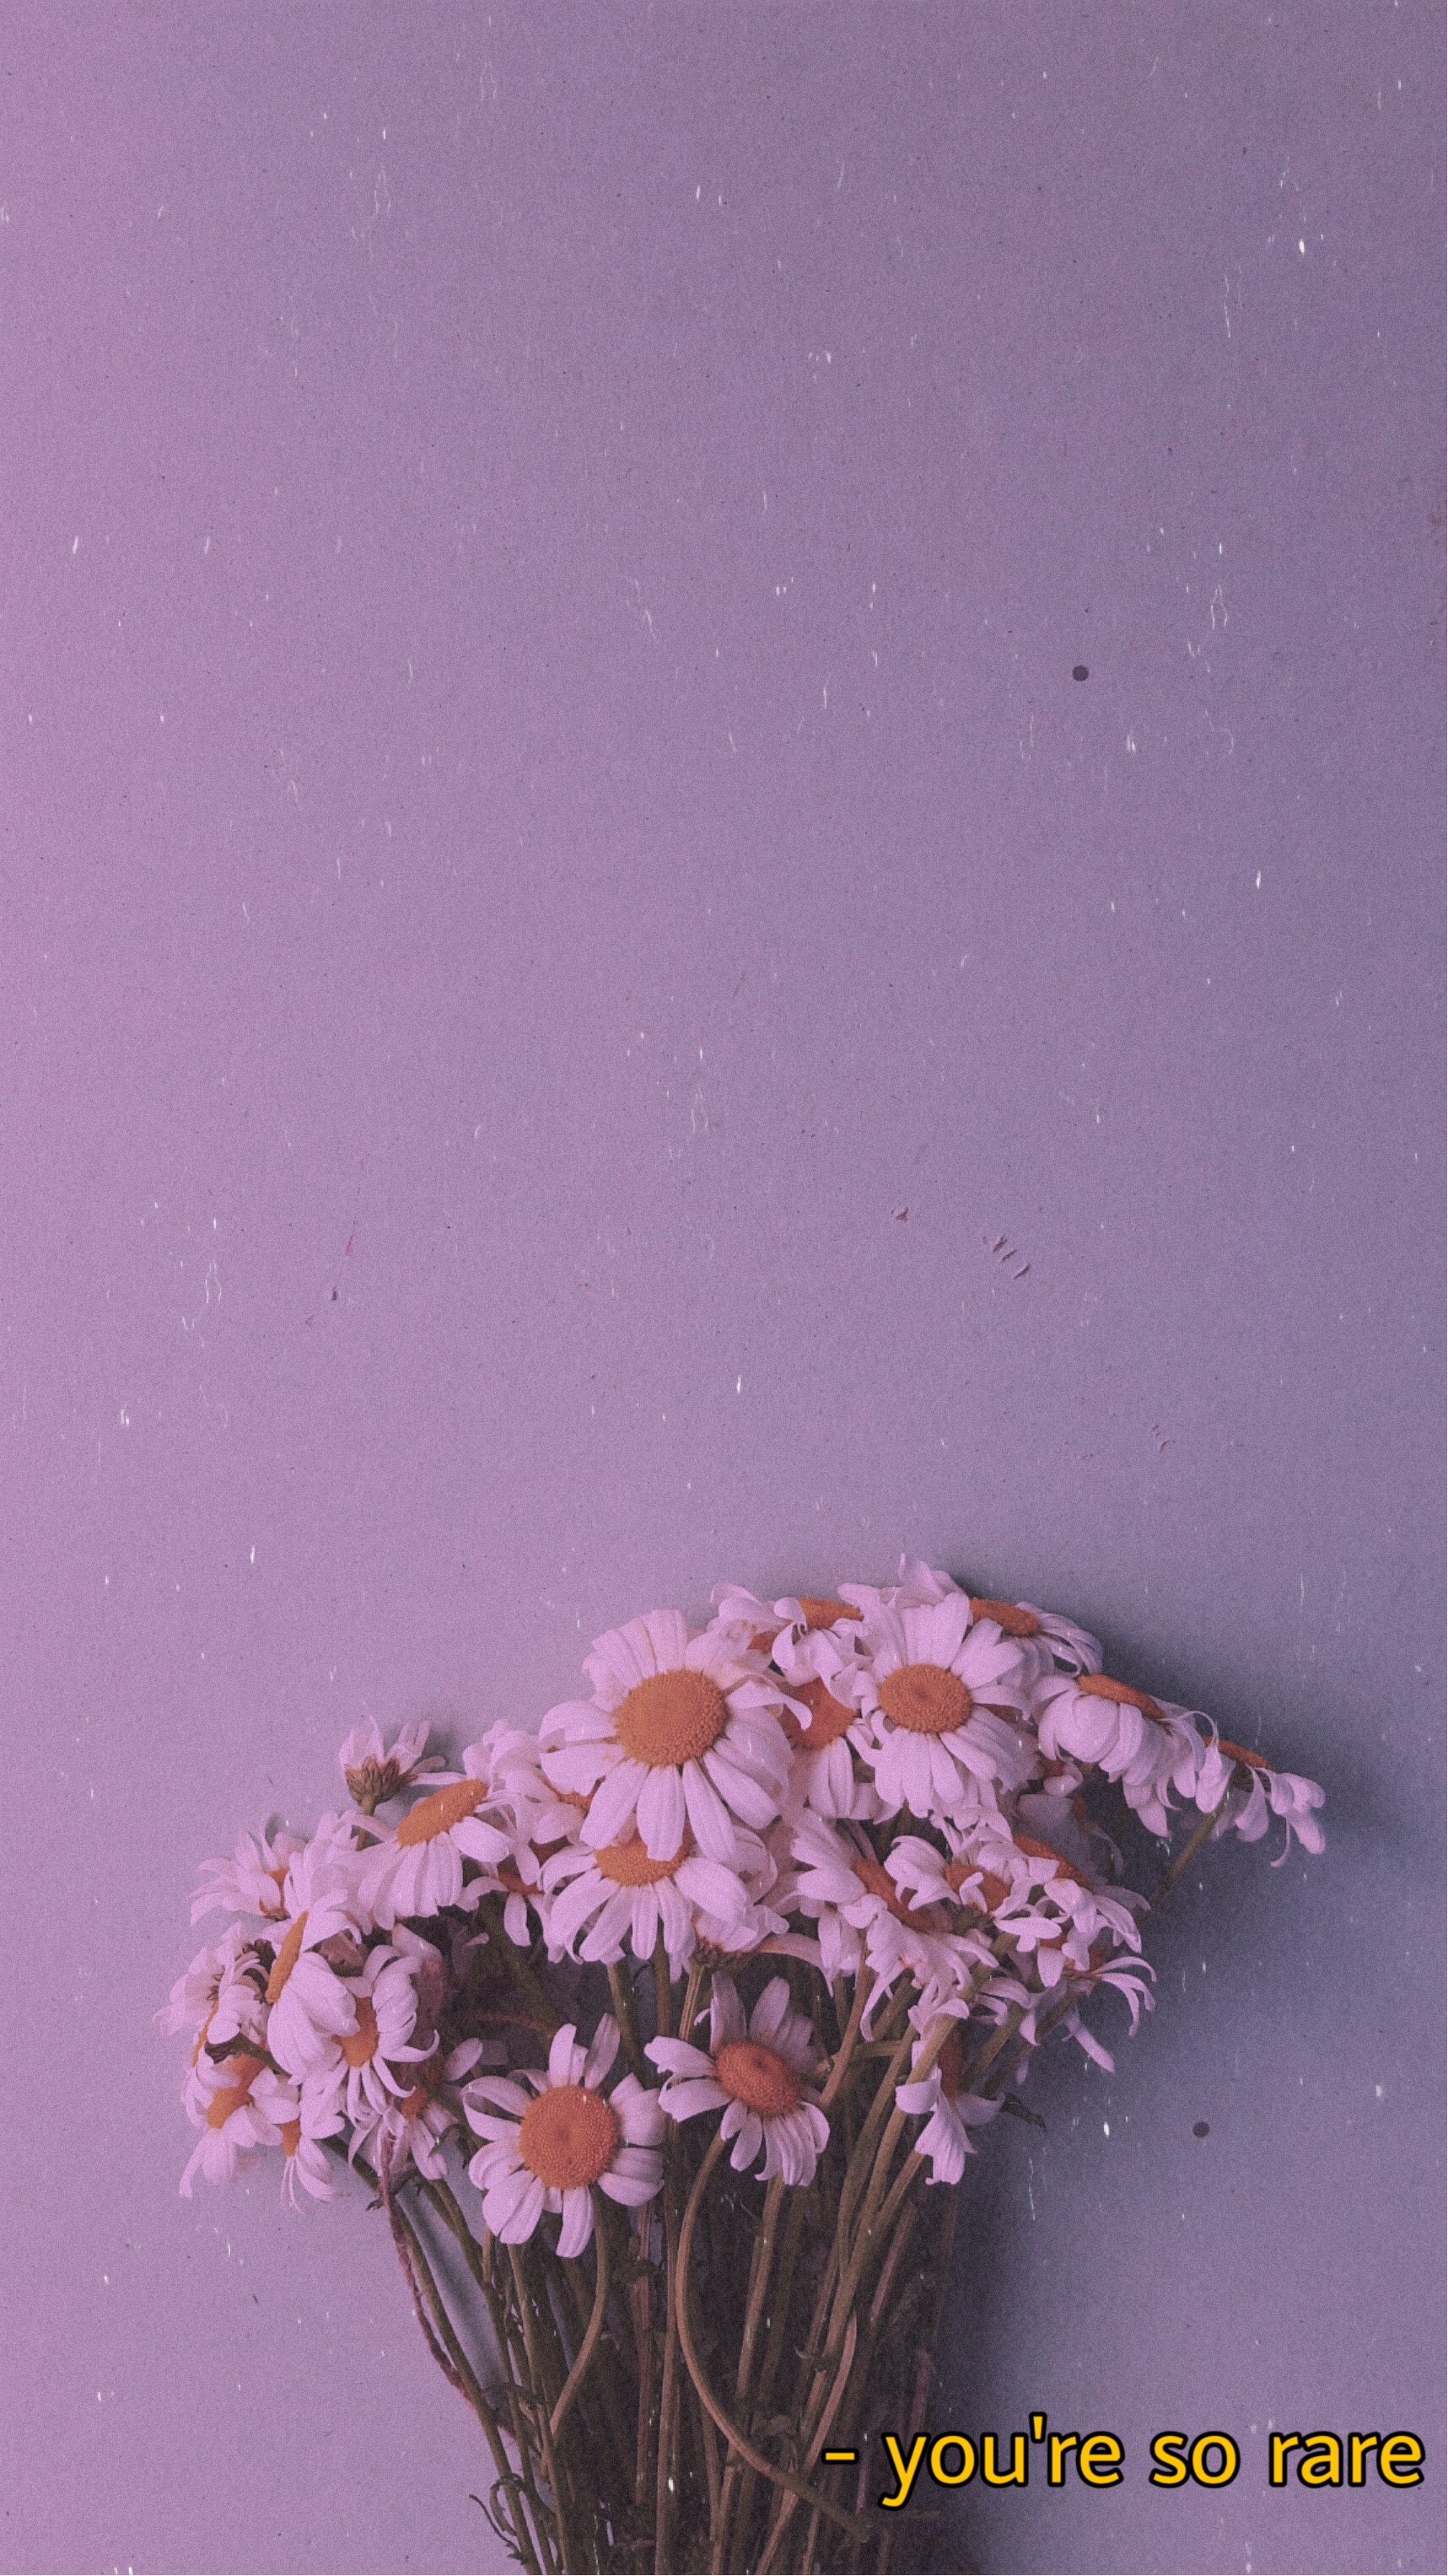 Wallpapers Daisy Flowers Image By Gxby She Her